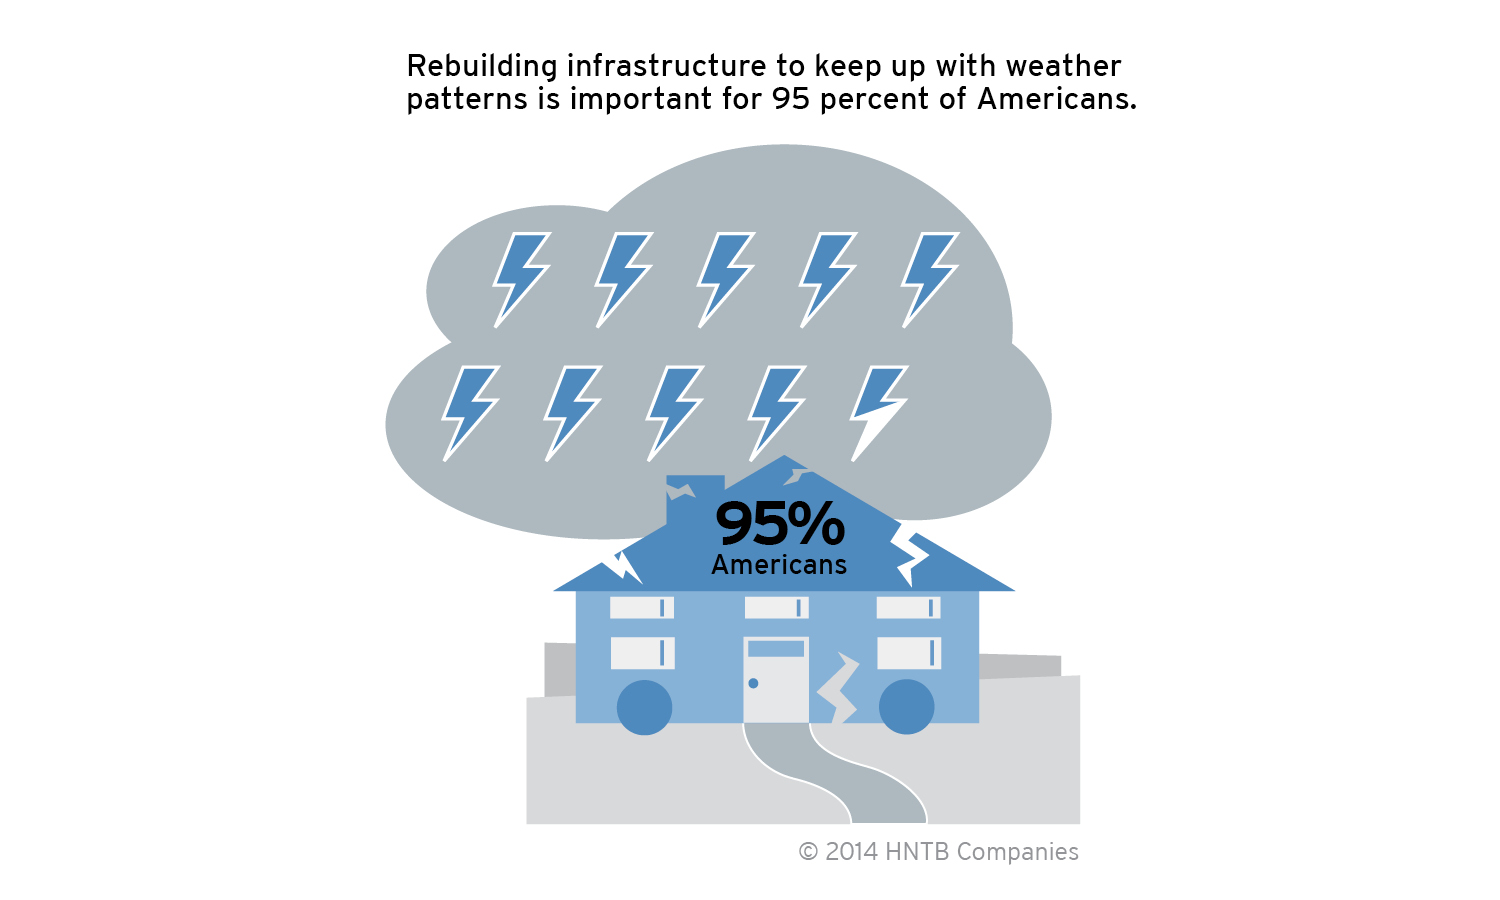 An overwhelming majority (95 percent) thinks it’s important to rebuild physical infrastructure so it survives increasingly intense weather patterns; 59 percent believes this is very crucial.